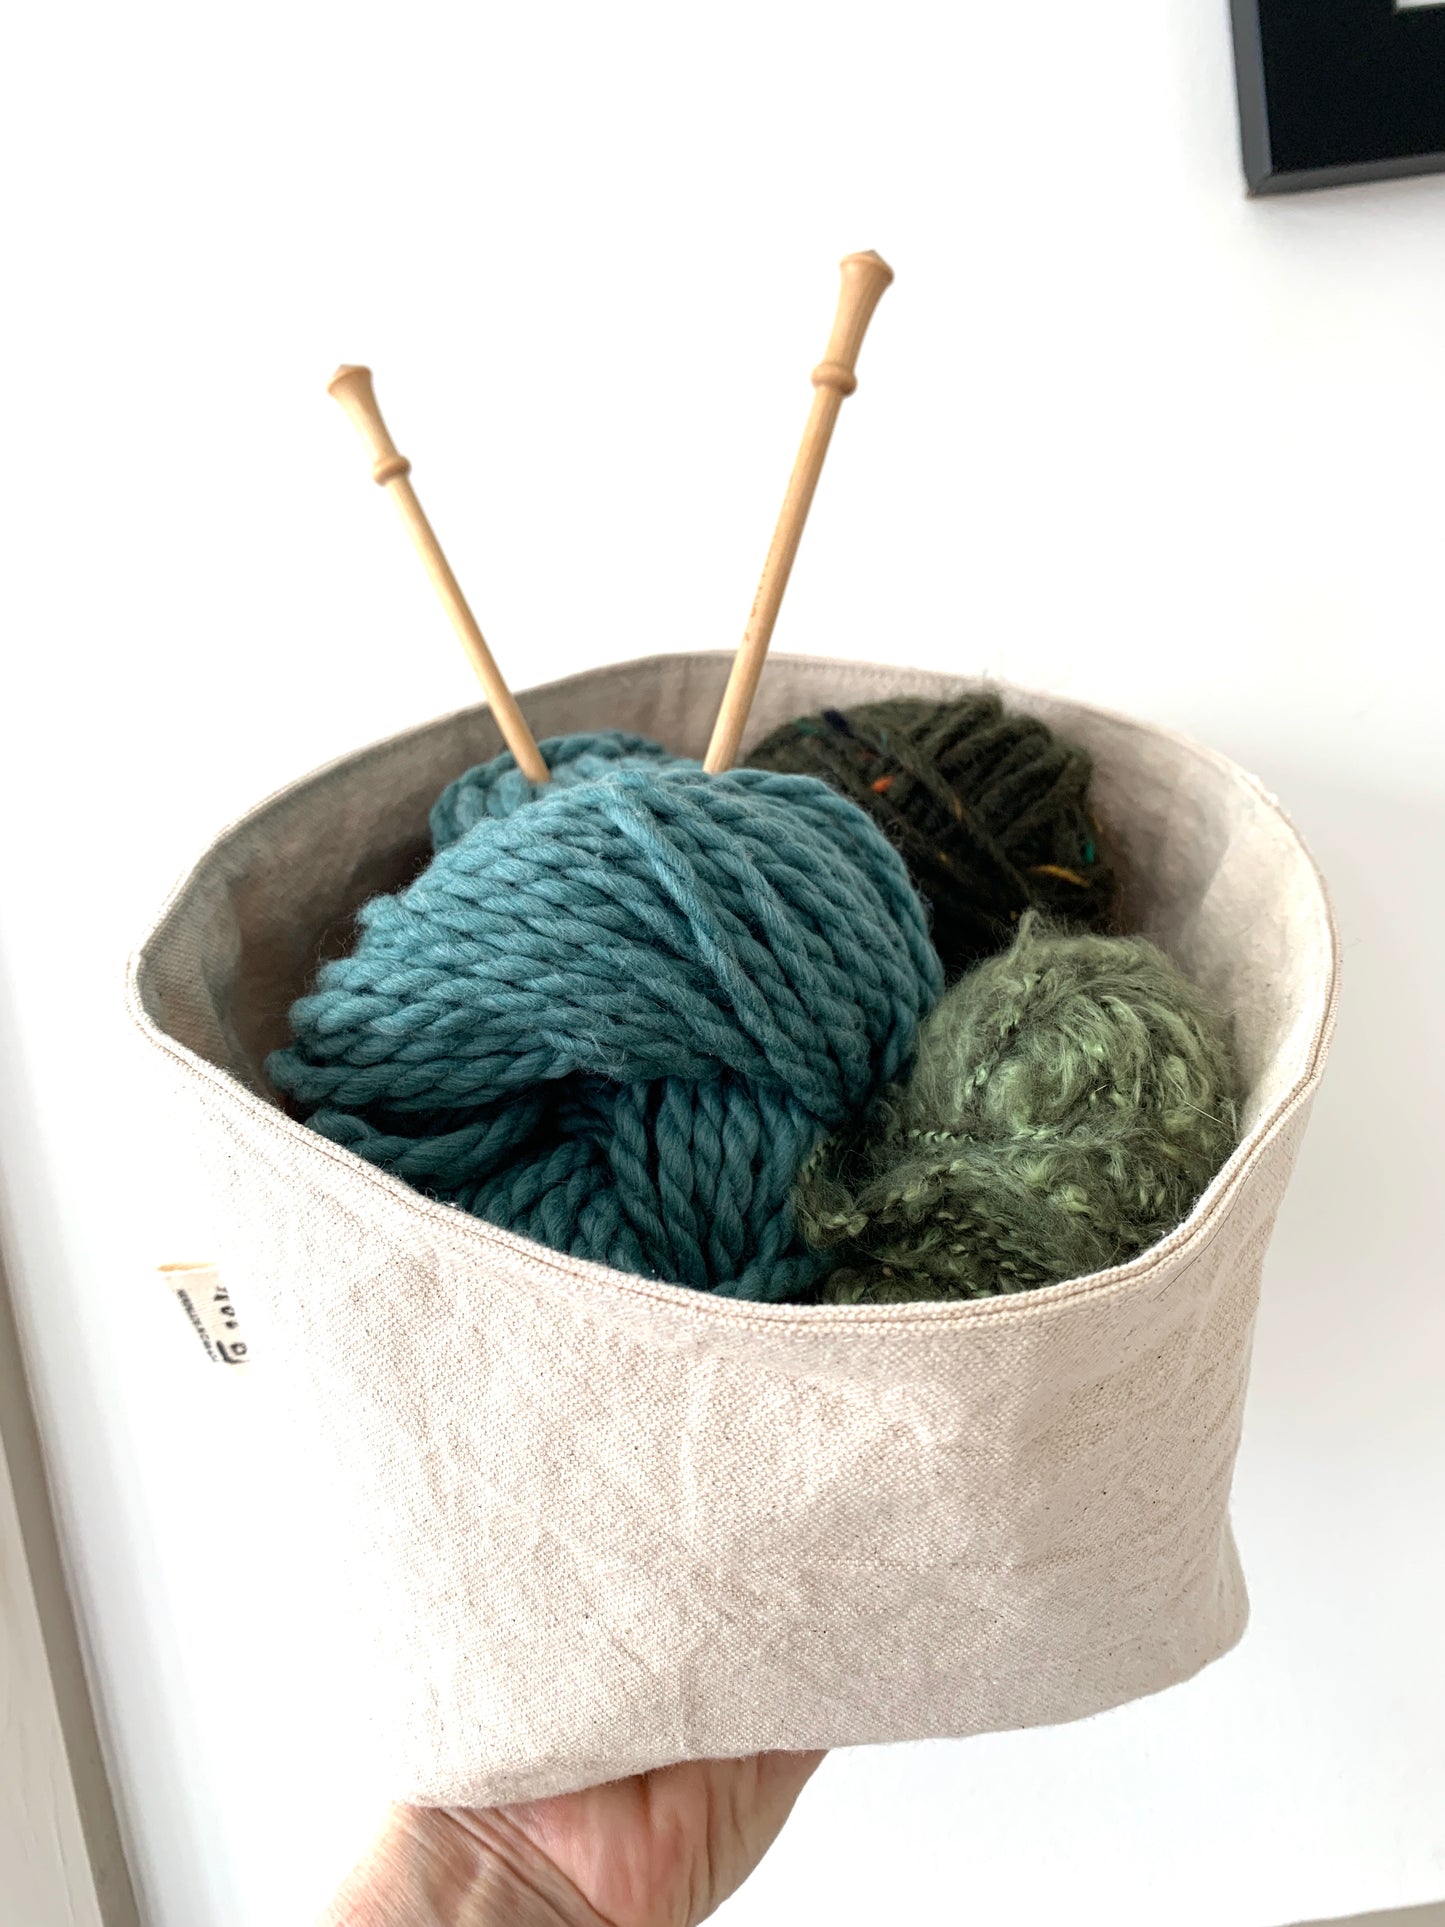 The large bucket filled with yarn and knitting needles